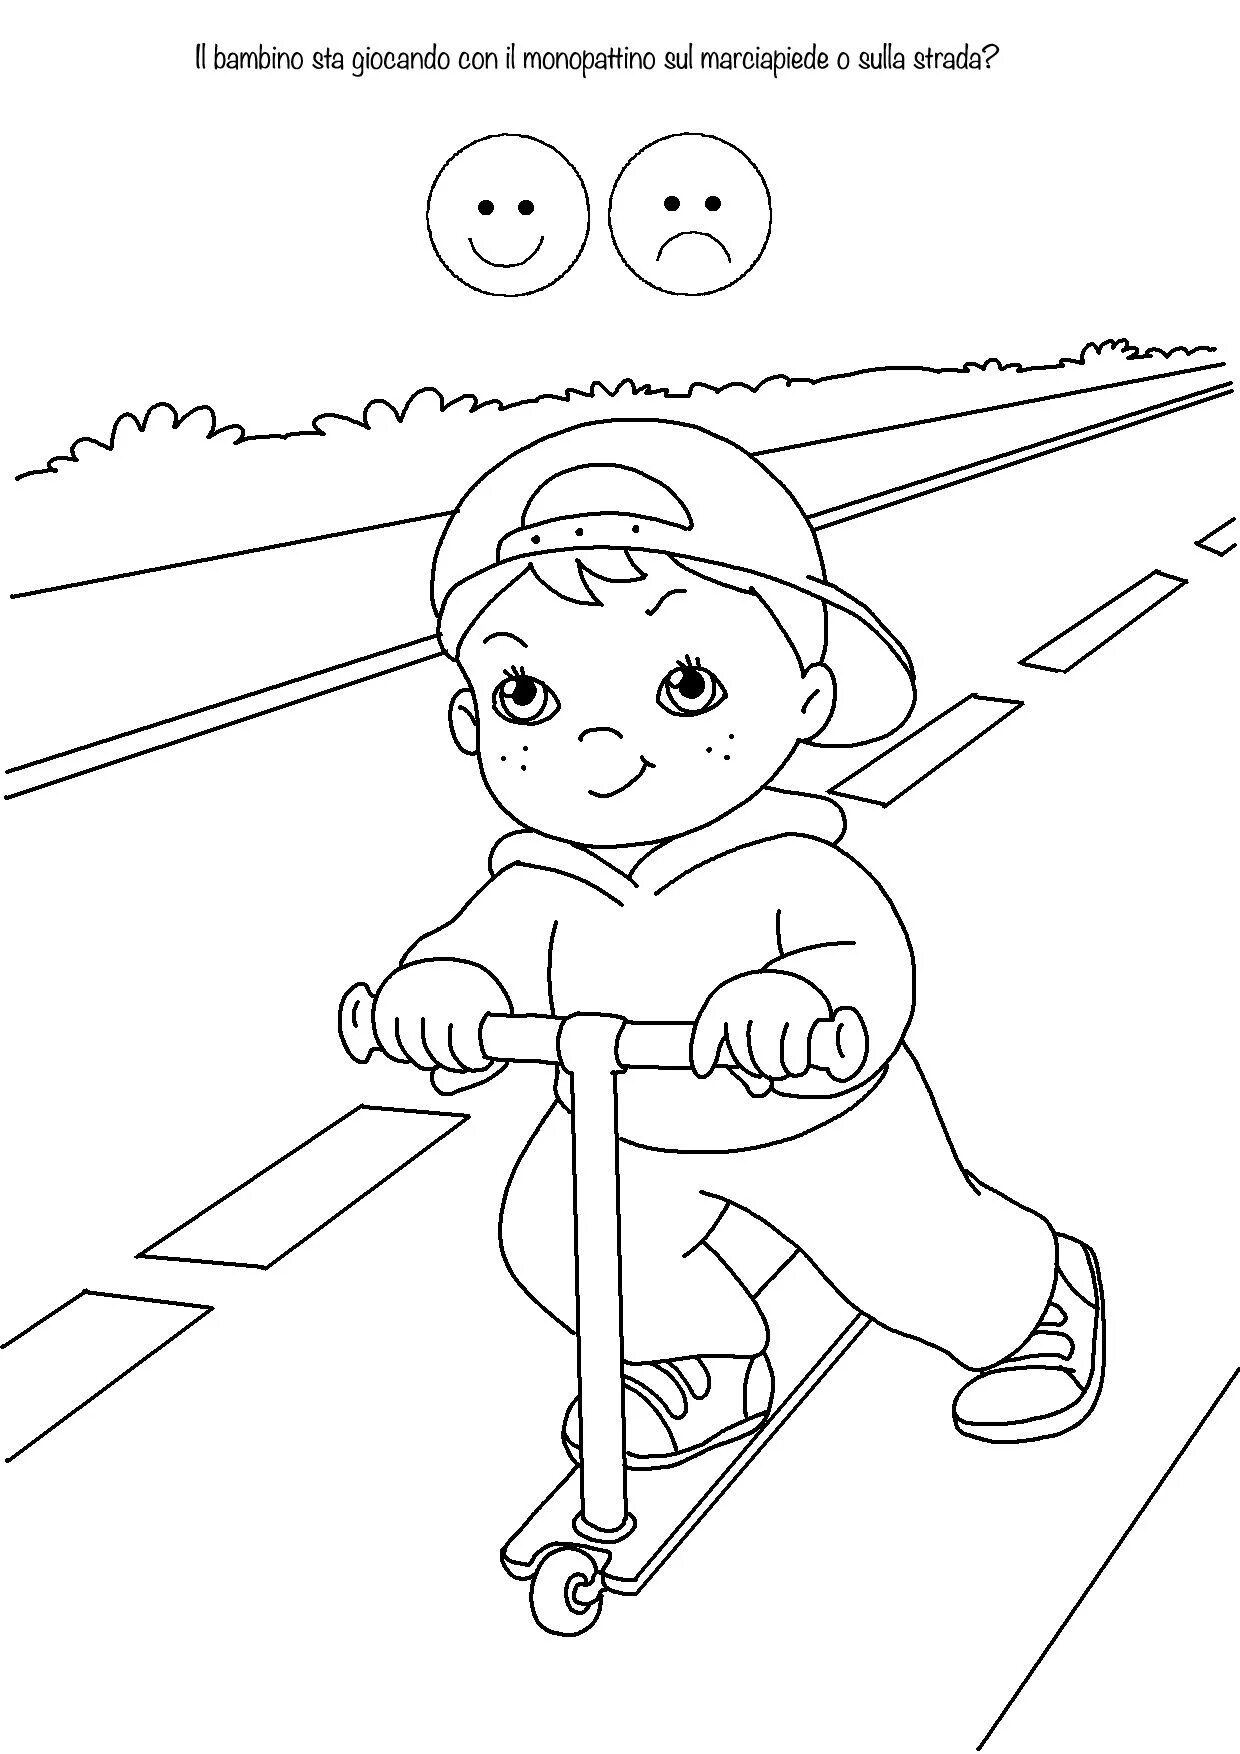 Intriguing winter traffic rules coloring book for kids